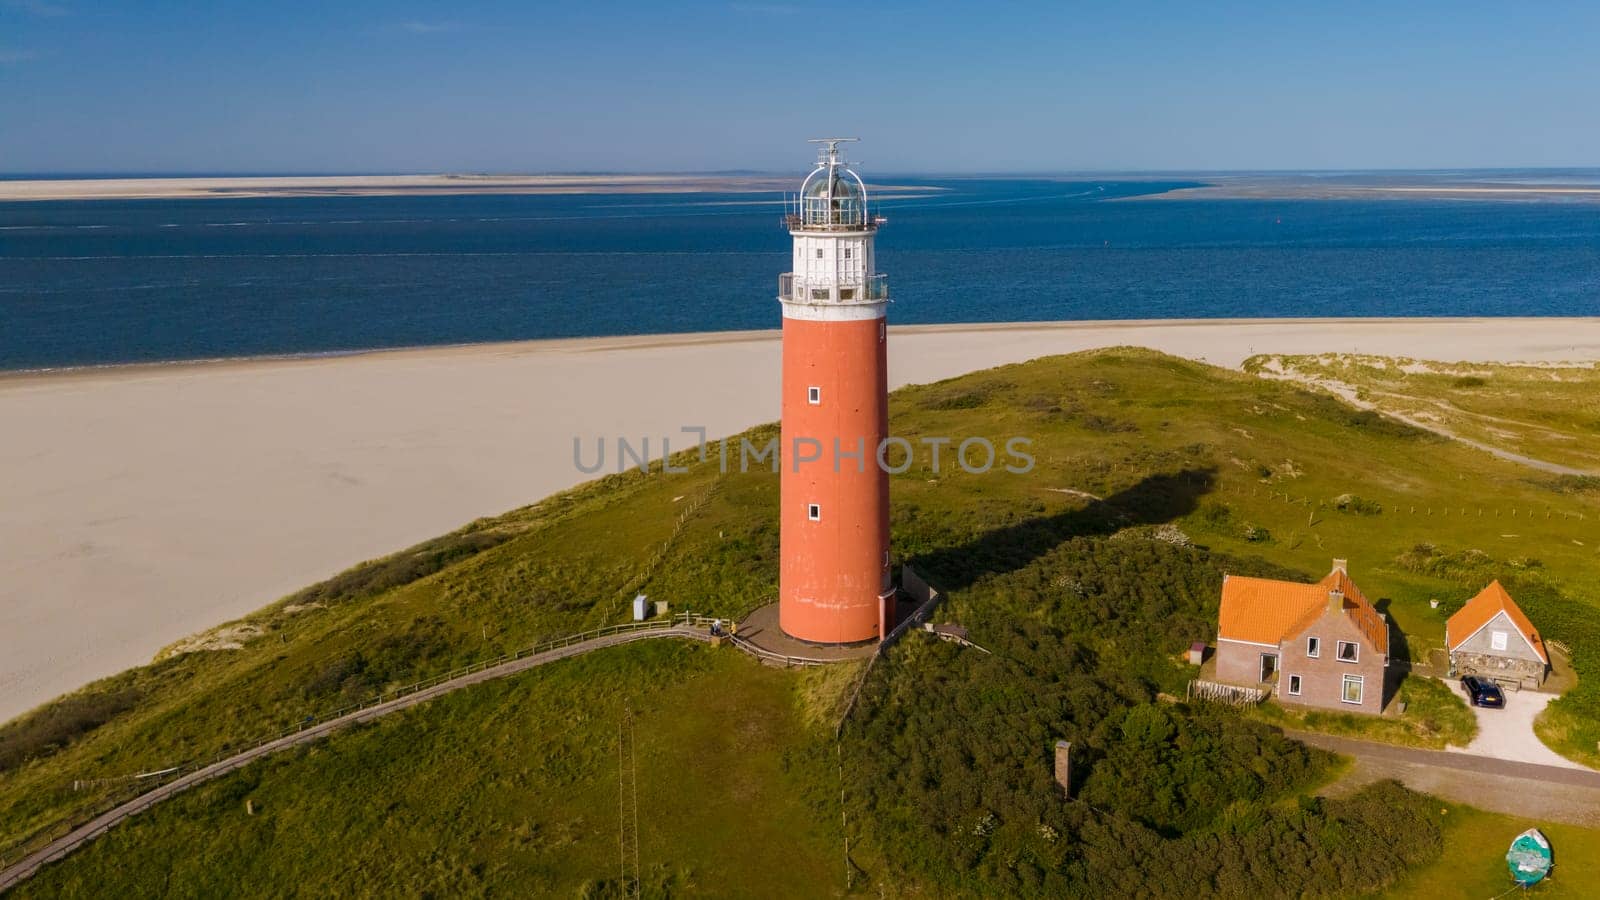 A breathtaking aerial view of a towering lighthouse standing tall on the sandy shores of Texel, Netherlands, guiding ships safely to land.